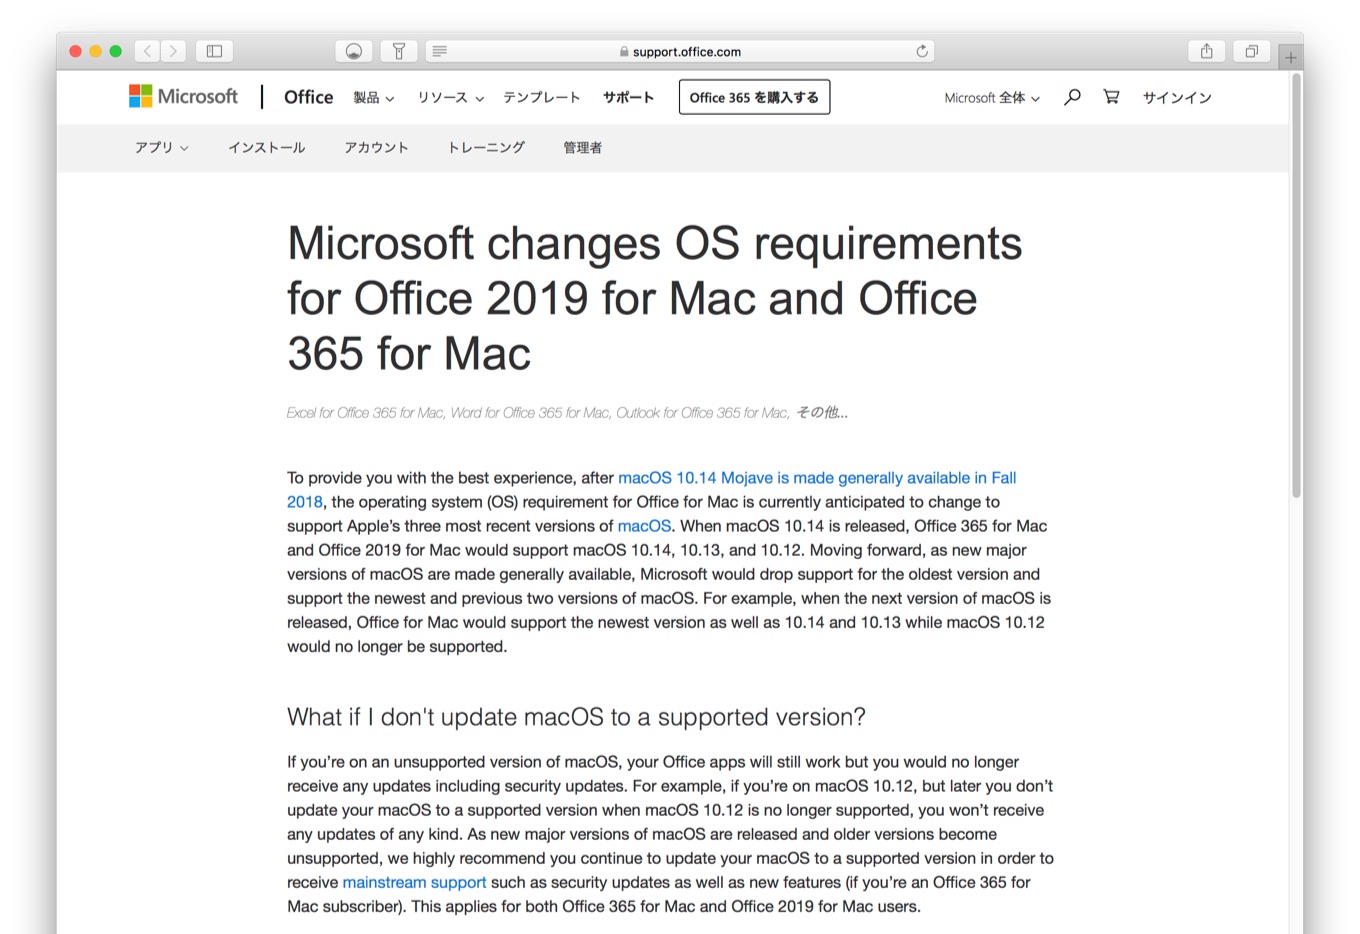 What Is The Mac Operating System For Microsoft Office 365